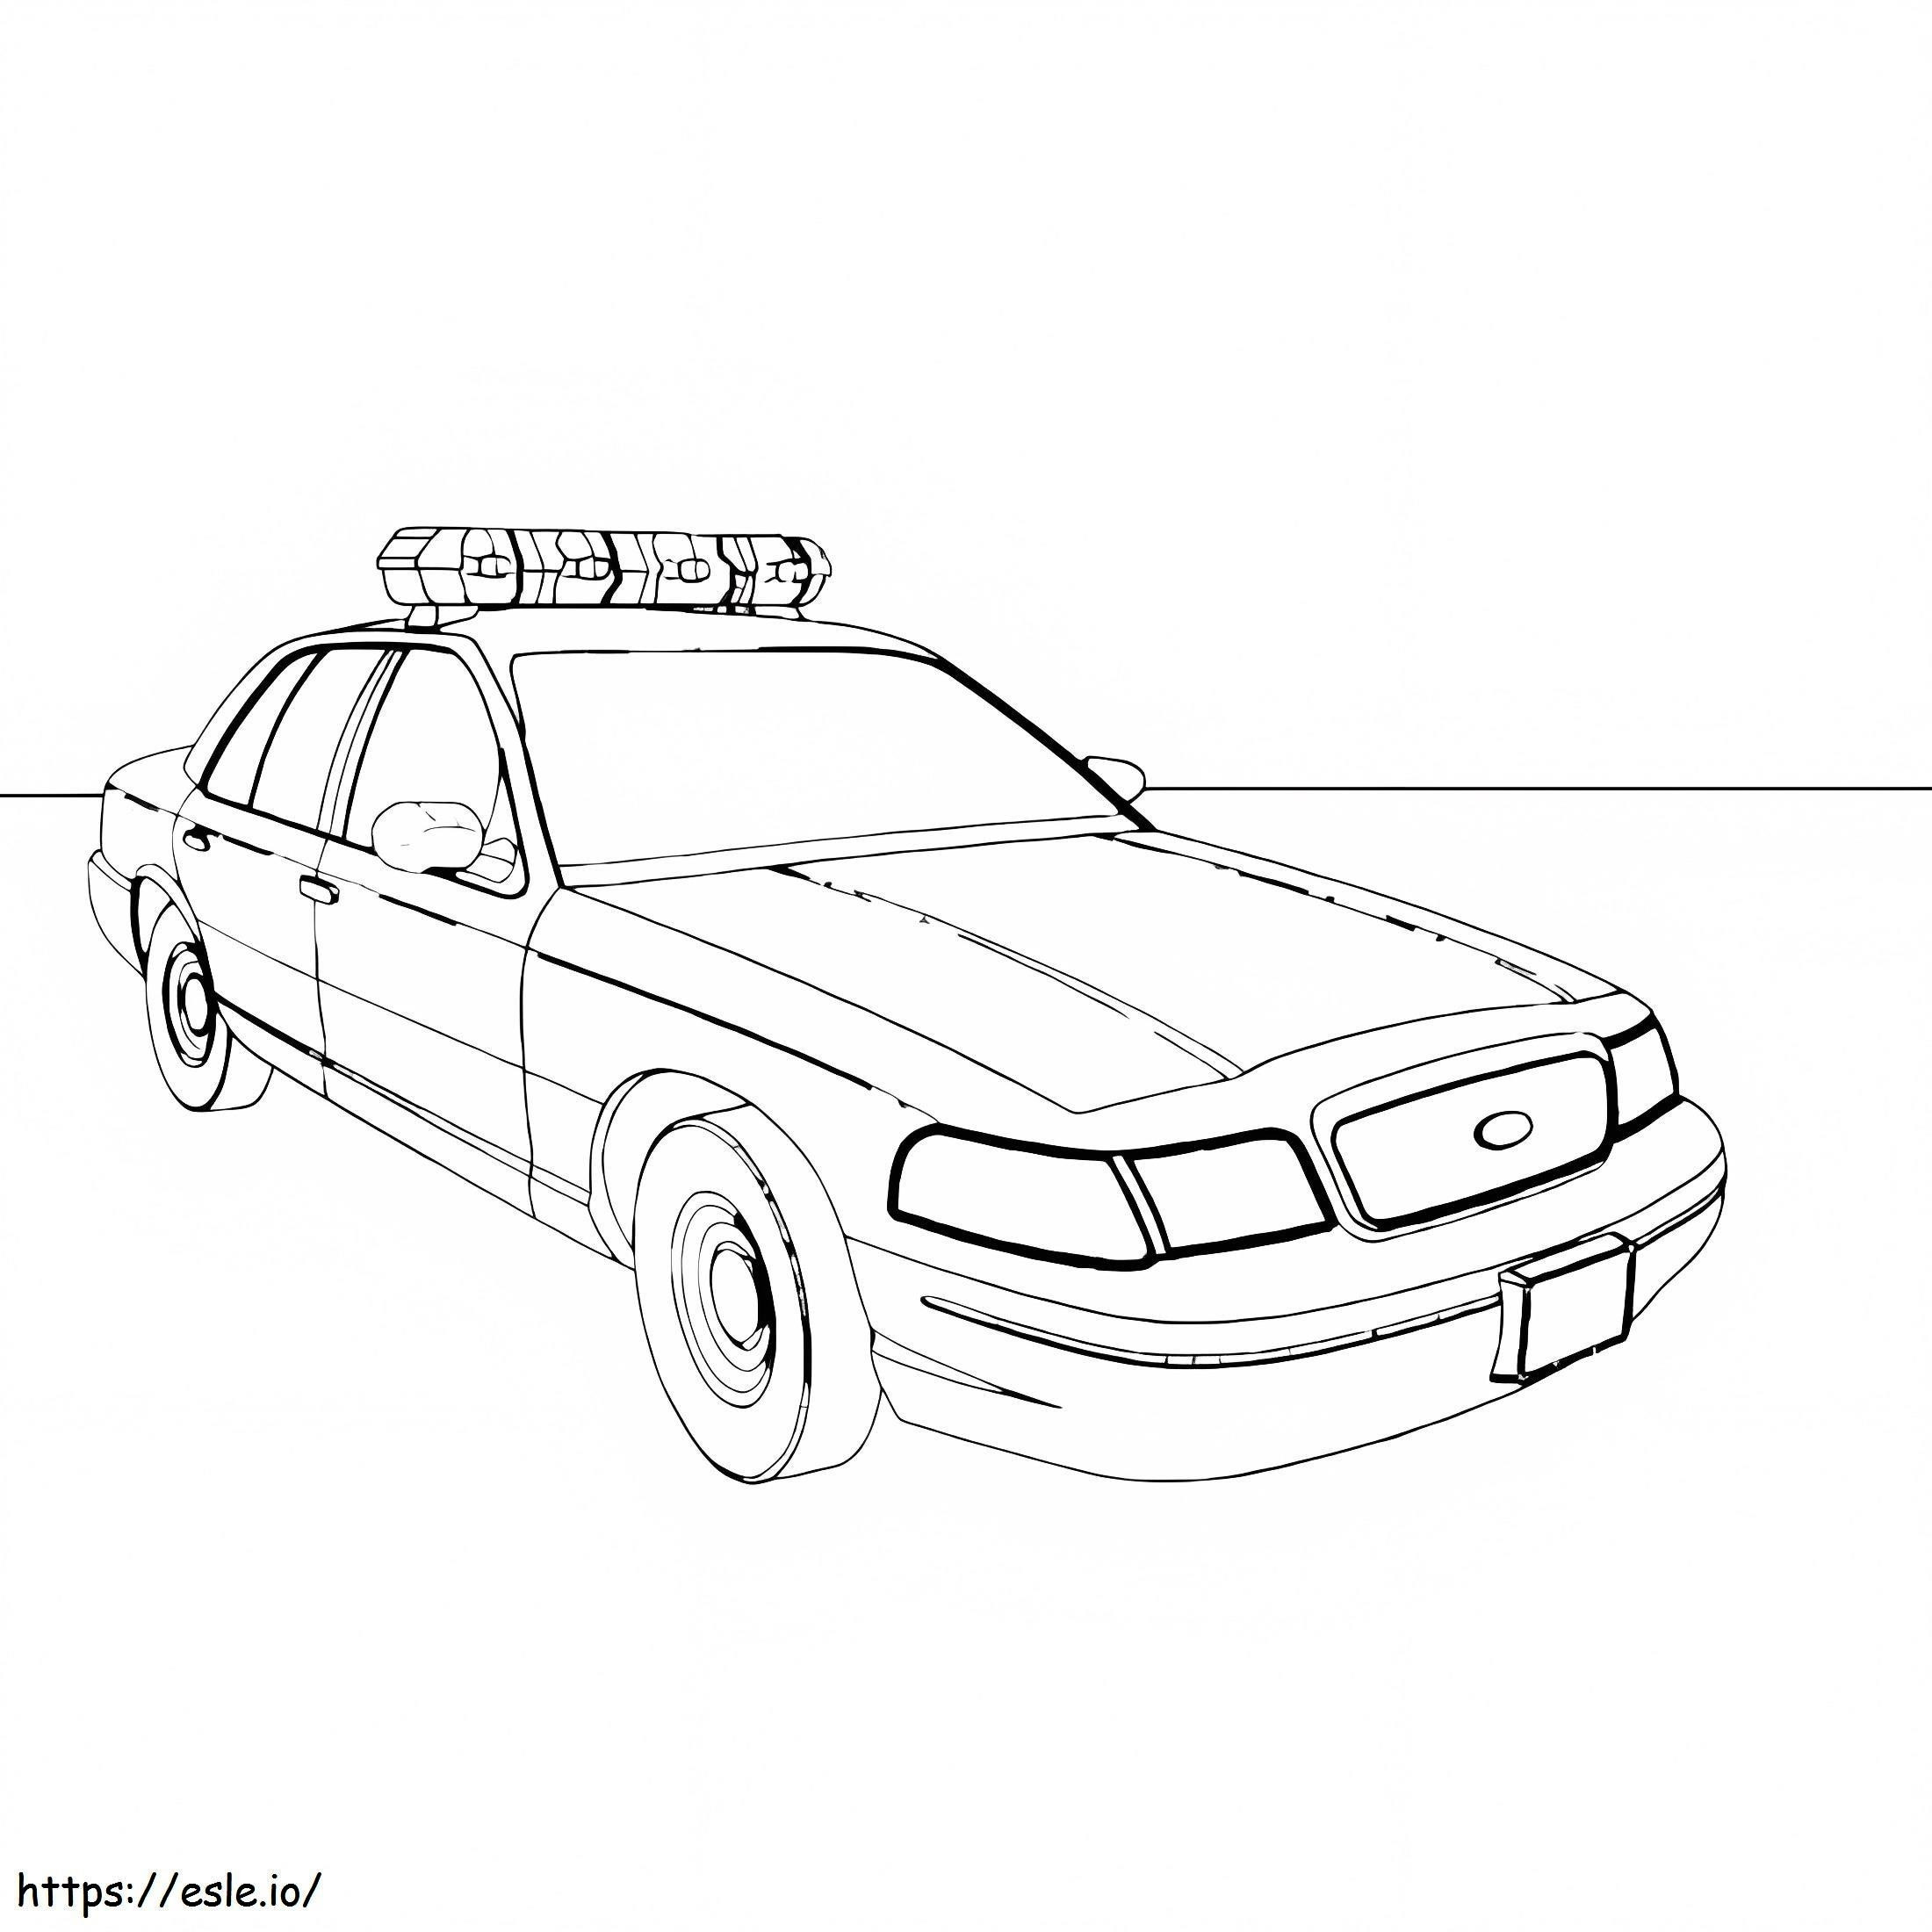 Police Car For Kids coloring page